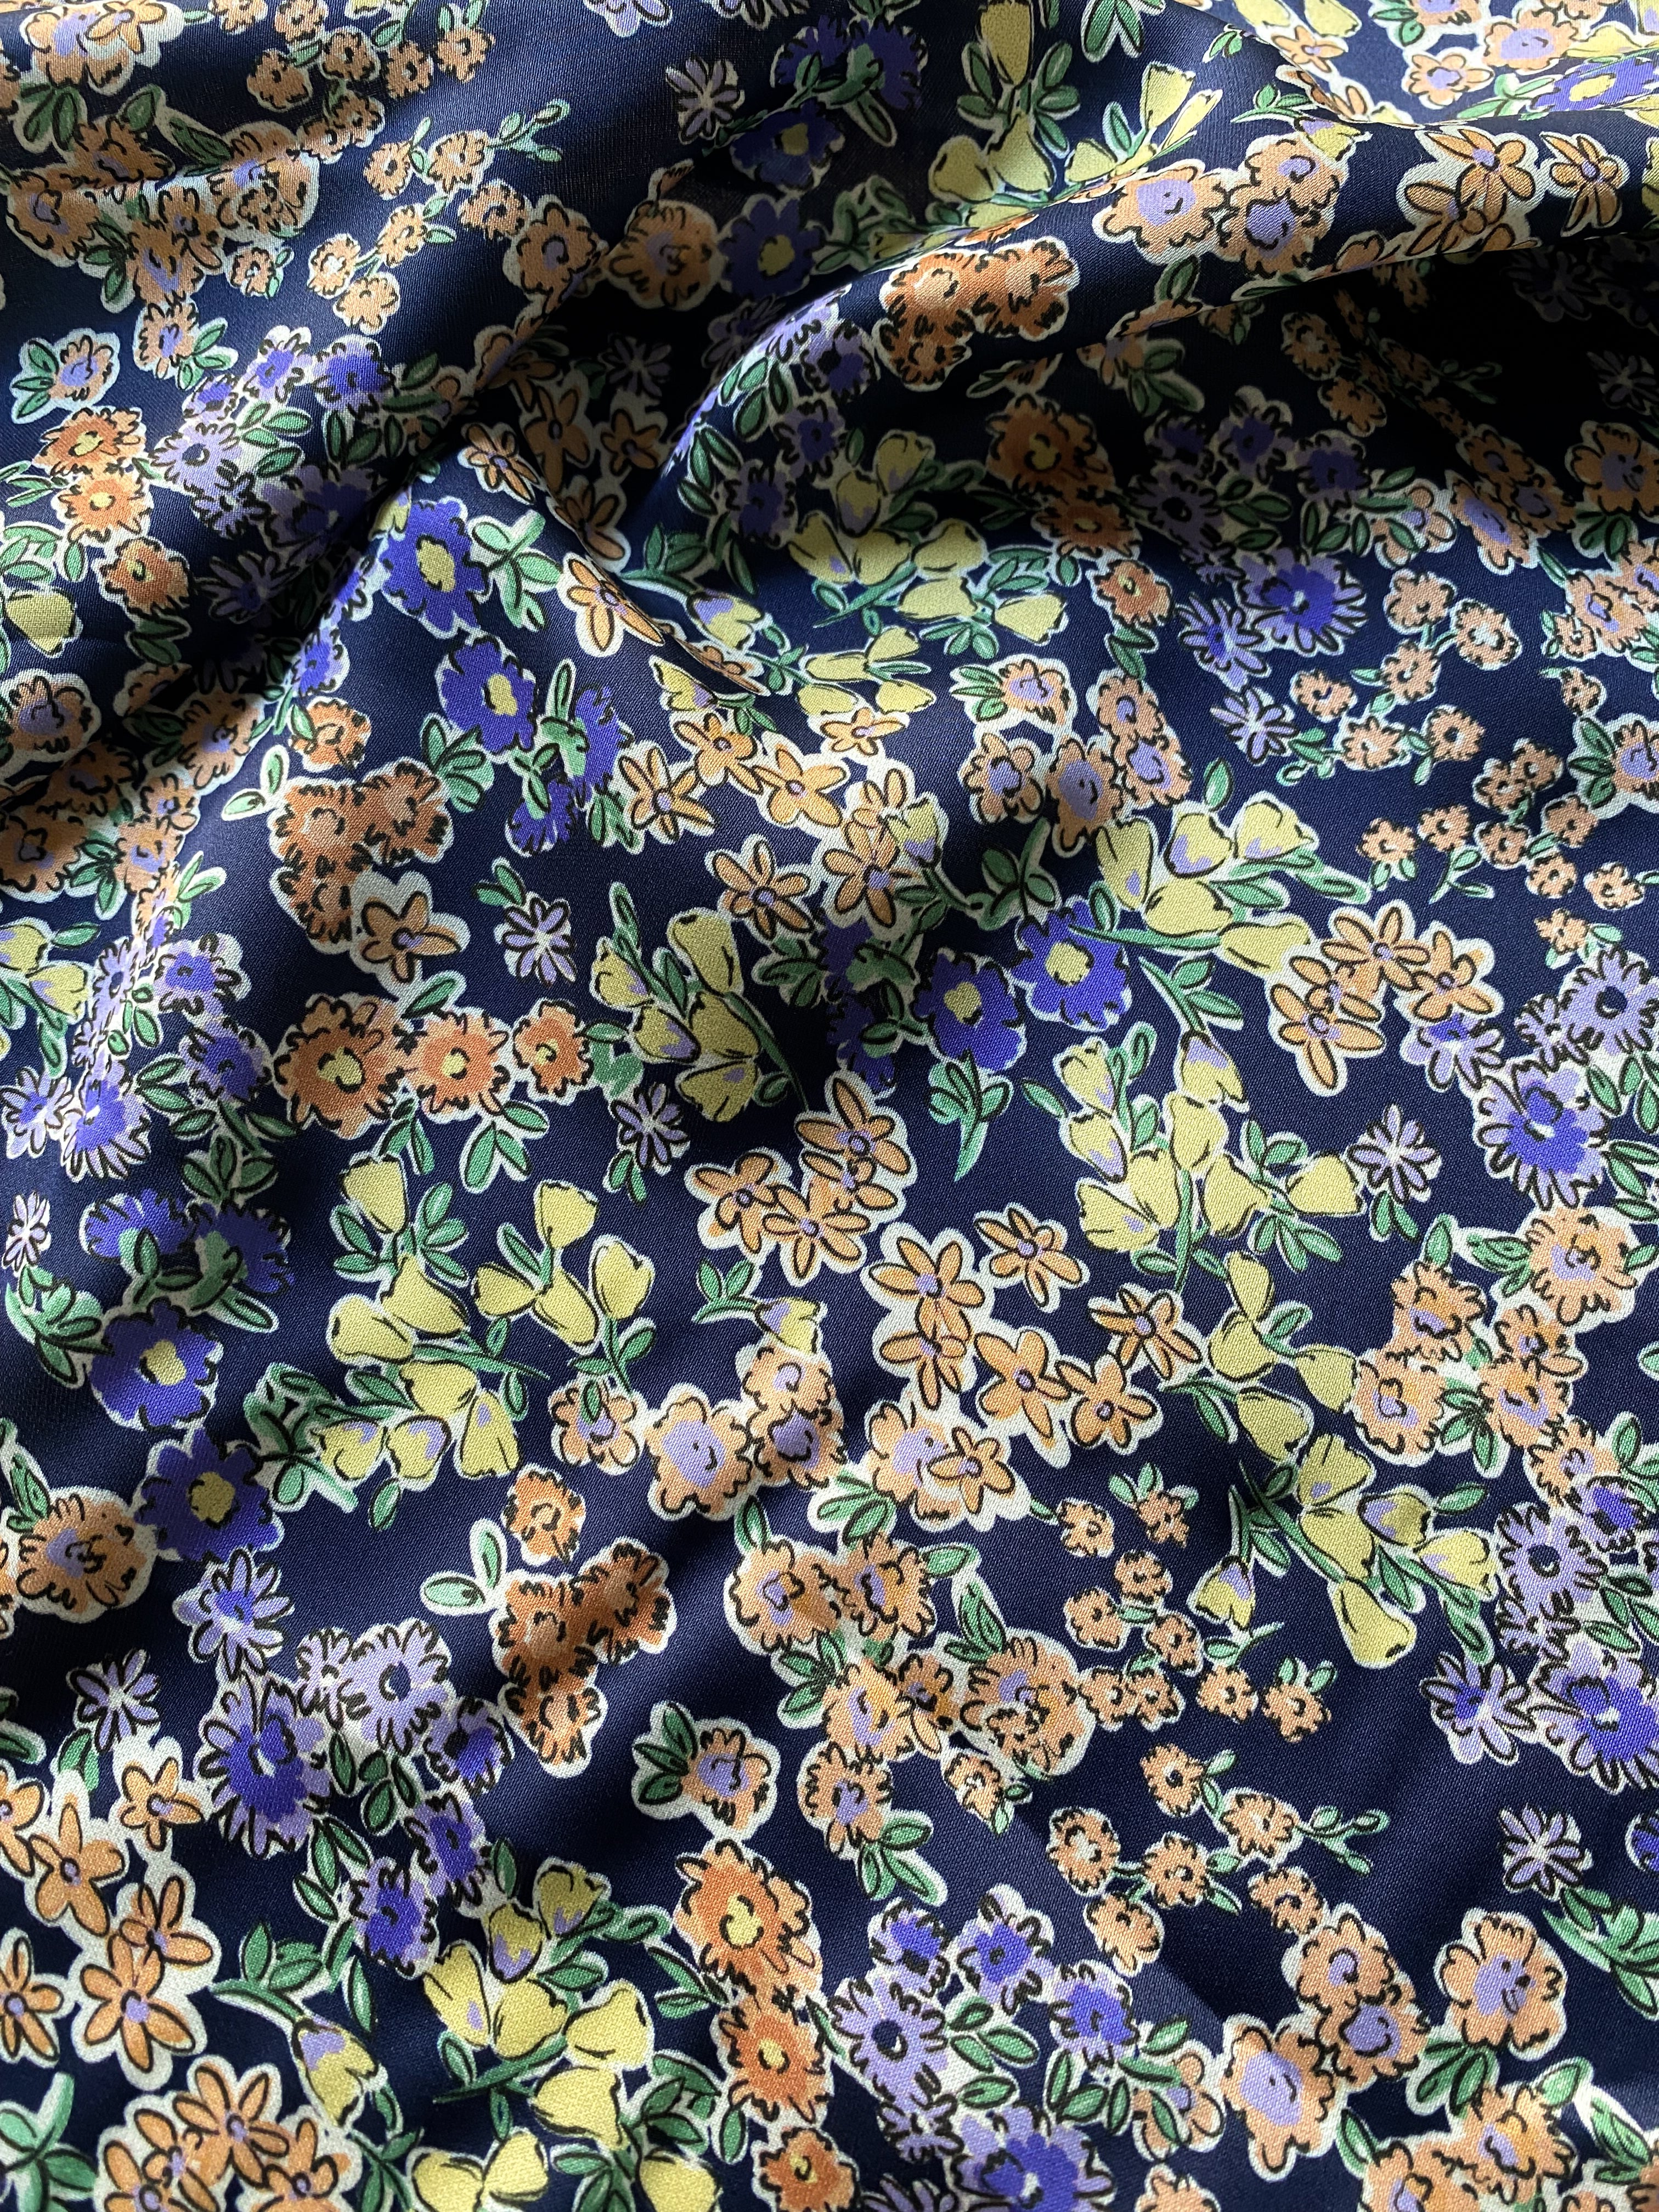 No. 114 viscose satin scattered flowers